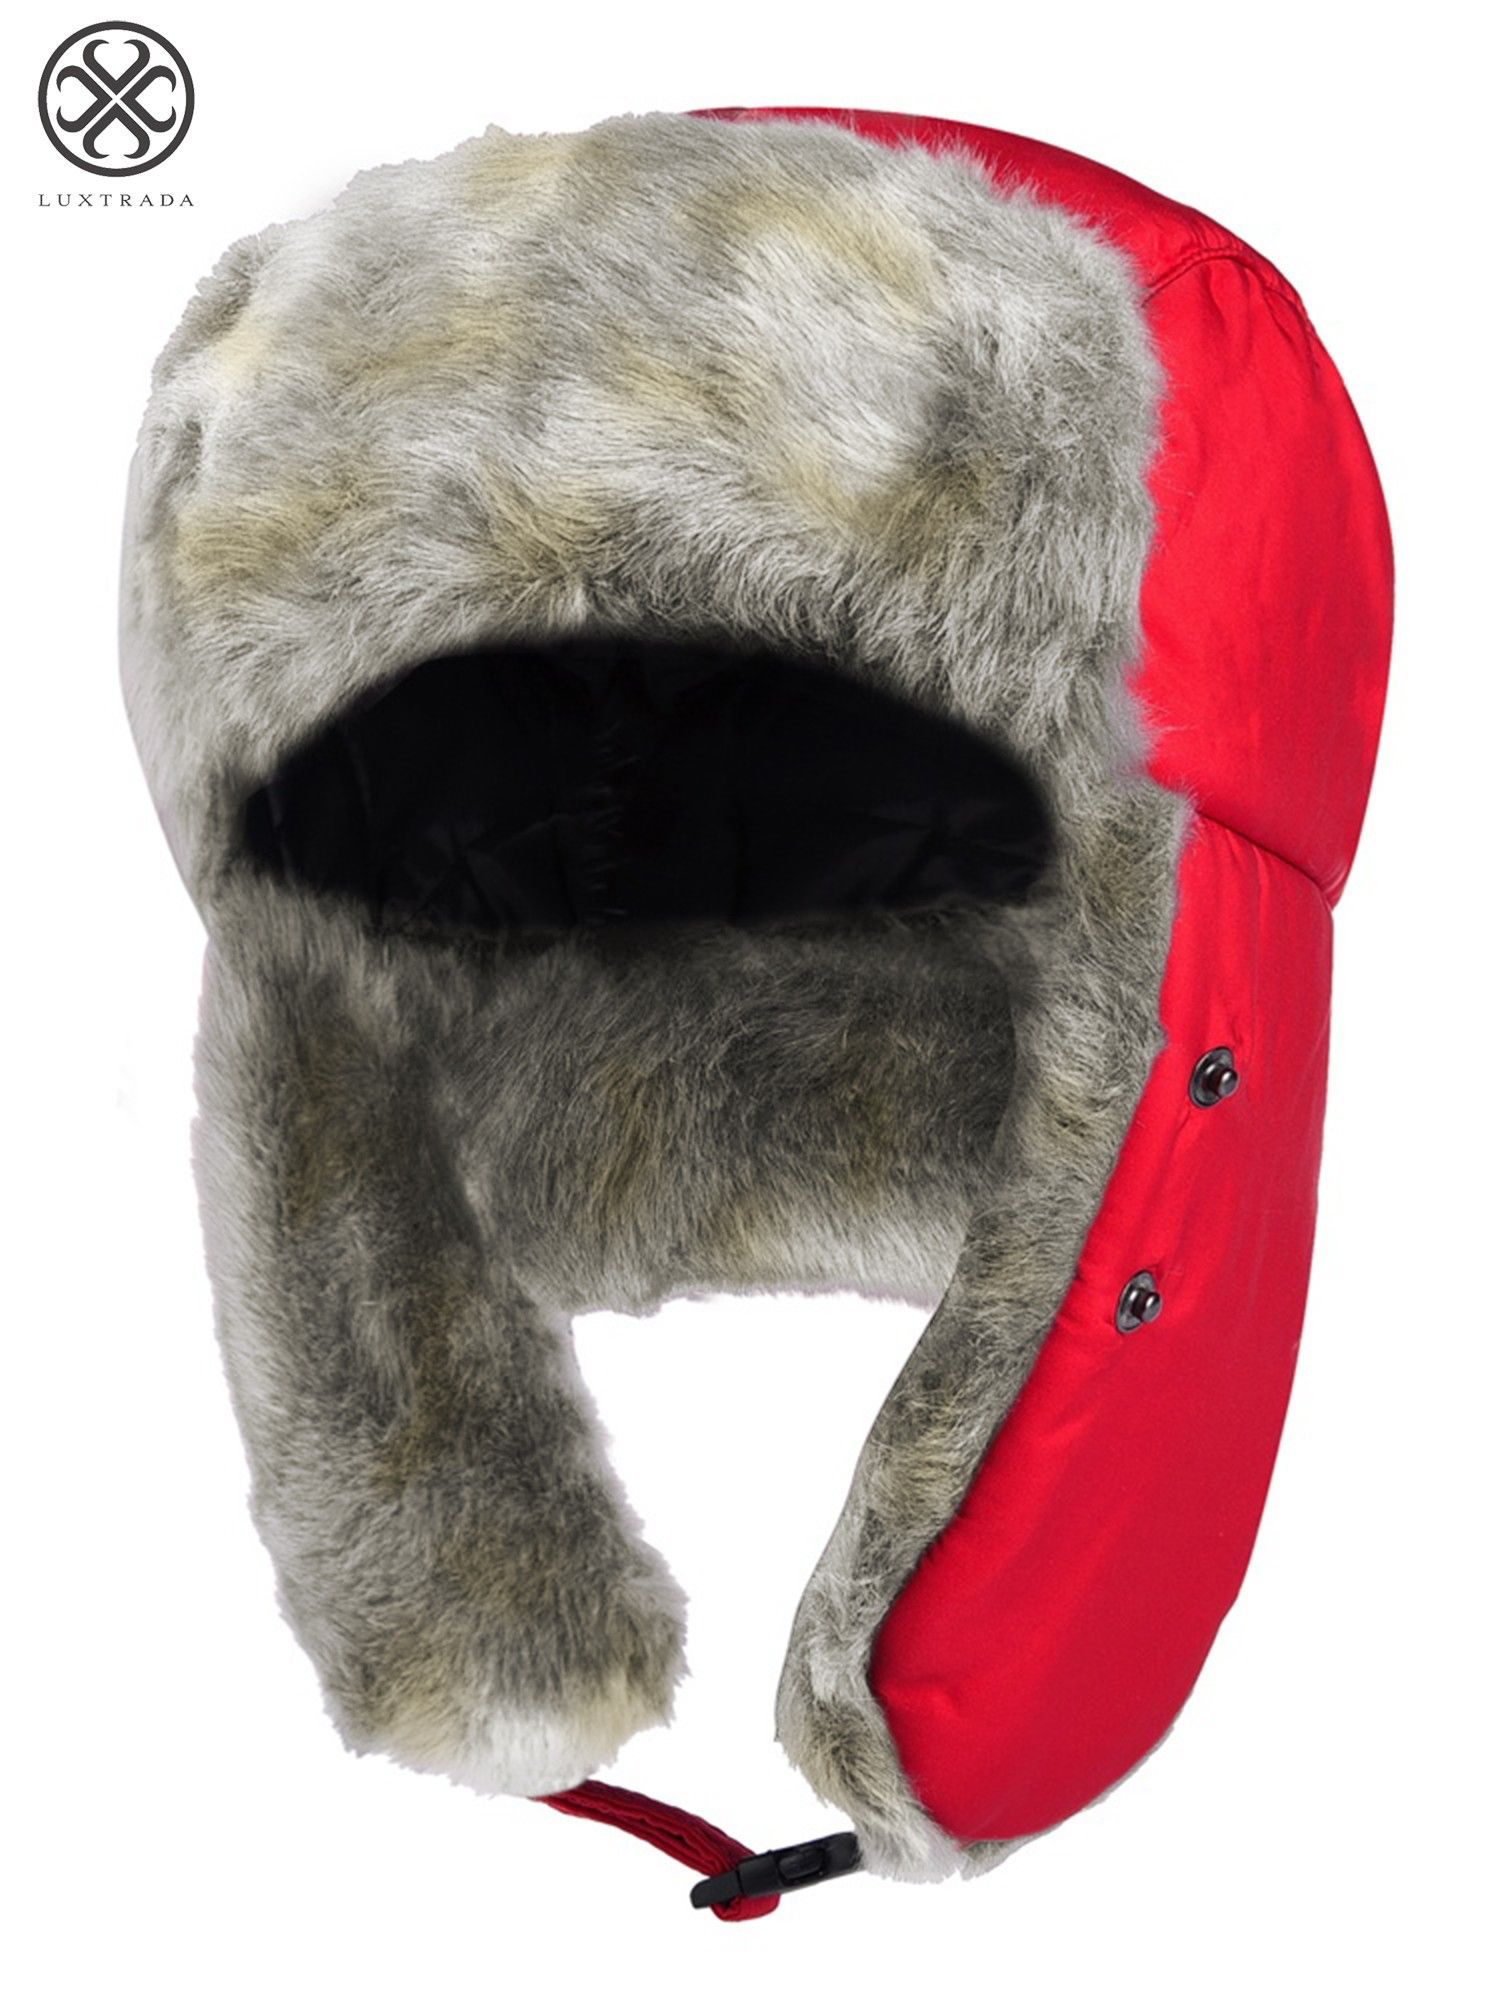 Luxtrada Winter Hats for Men and Women Trooper Hunting Hat Ushanka Hat Ski Hat with Ear Flaps Windproof Waterproof Warm Hat (Red) - image 4 of 10